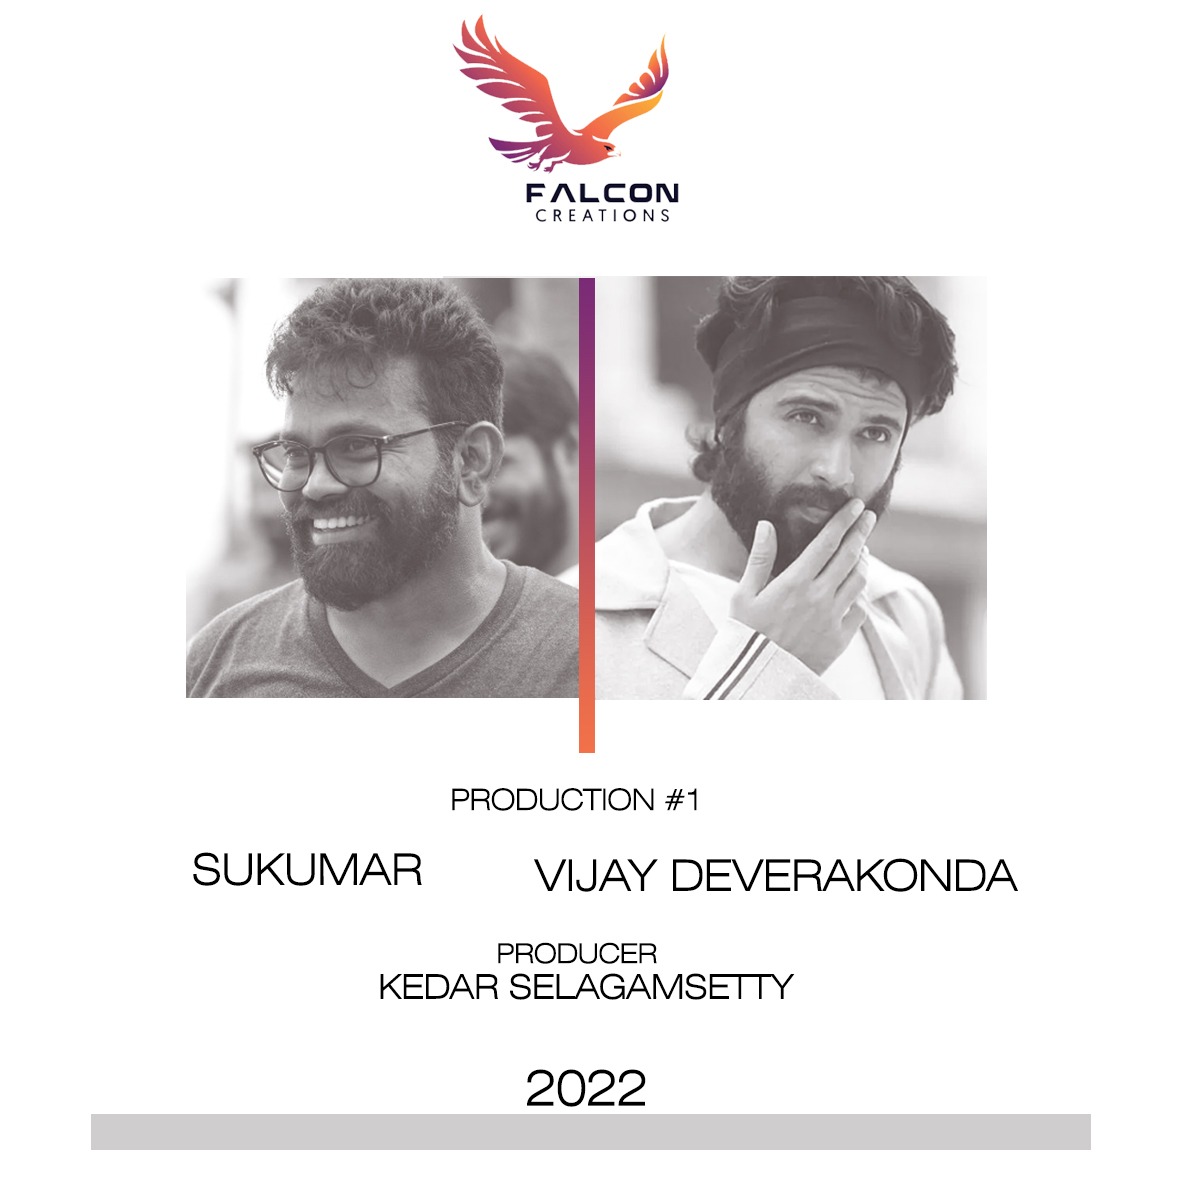 Sukumar - Vijay Deverakonda

The actor in me is super excited 
The audience in me is celebrating! 
We guarantee you memorable Cinema.. I can't wait to be on set with Sukku sirrr 😘🤗

Happy birthday Kedar, you've been a good friend and you work extremely hard :)